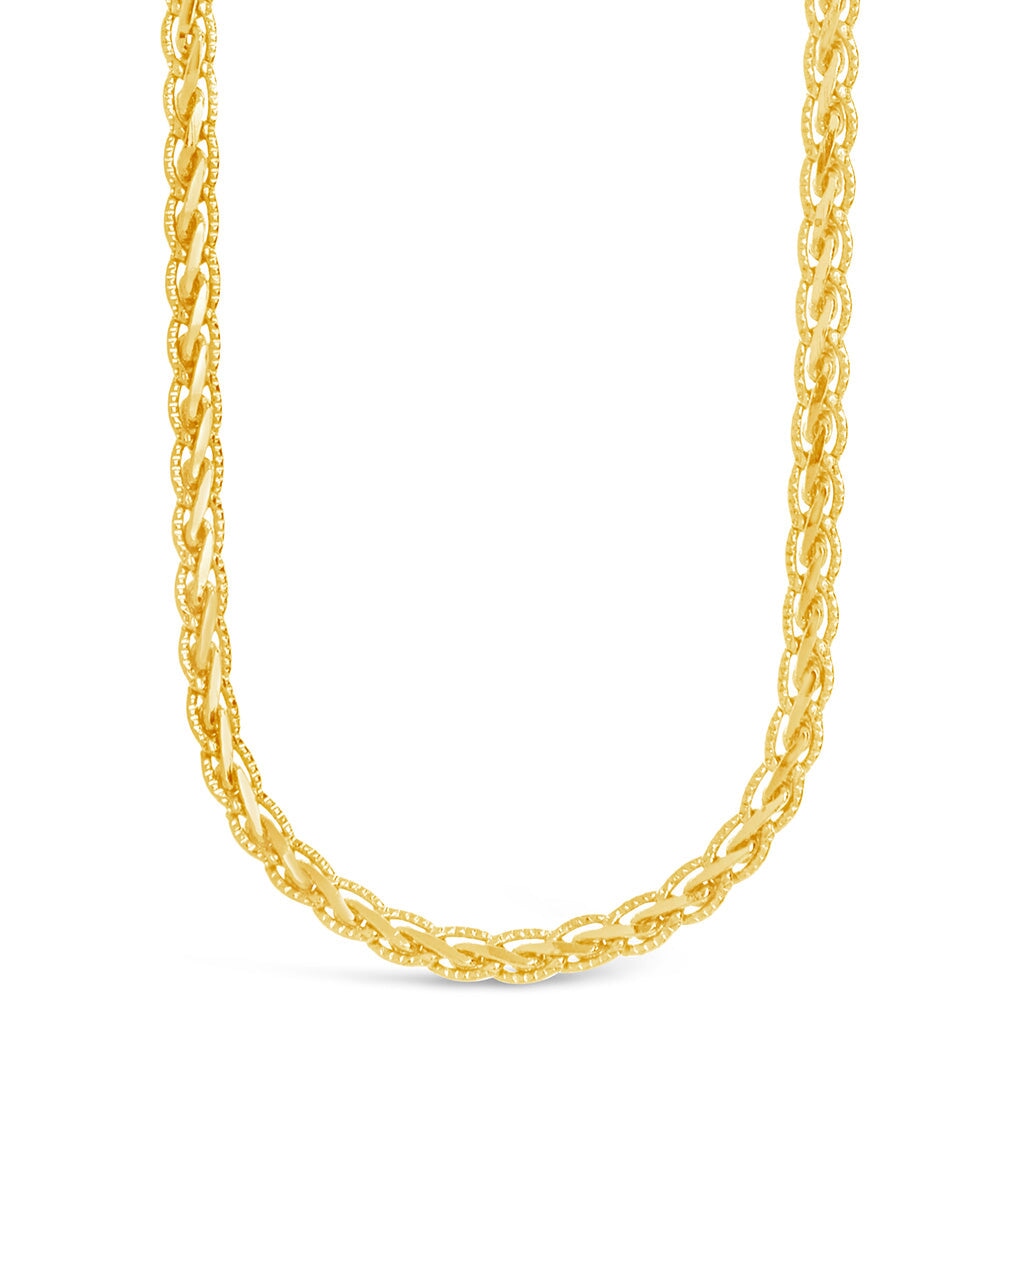 Larissa Chain Necklace Necklace Sterling Forever Gold 